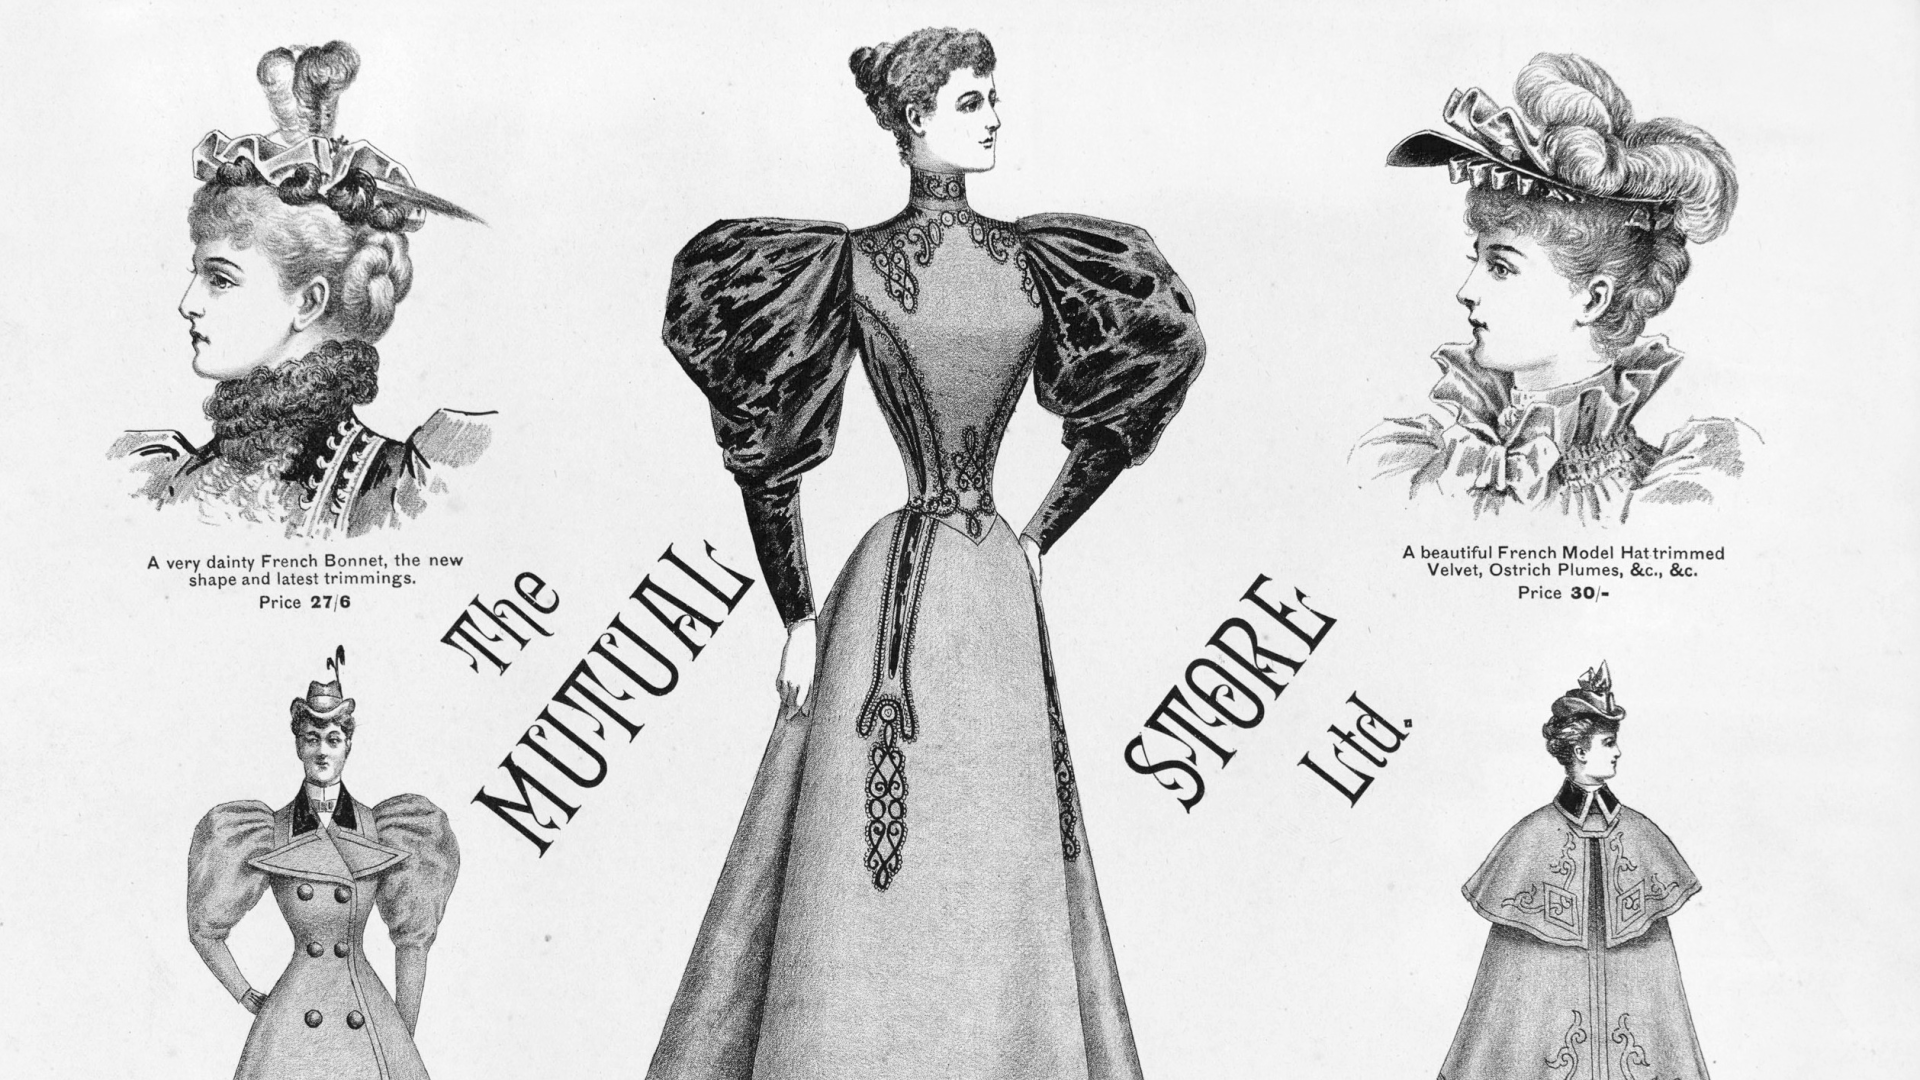 Black and white illustrations of 19th century women's fashion